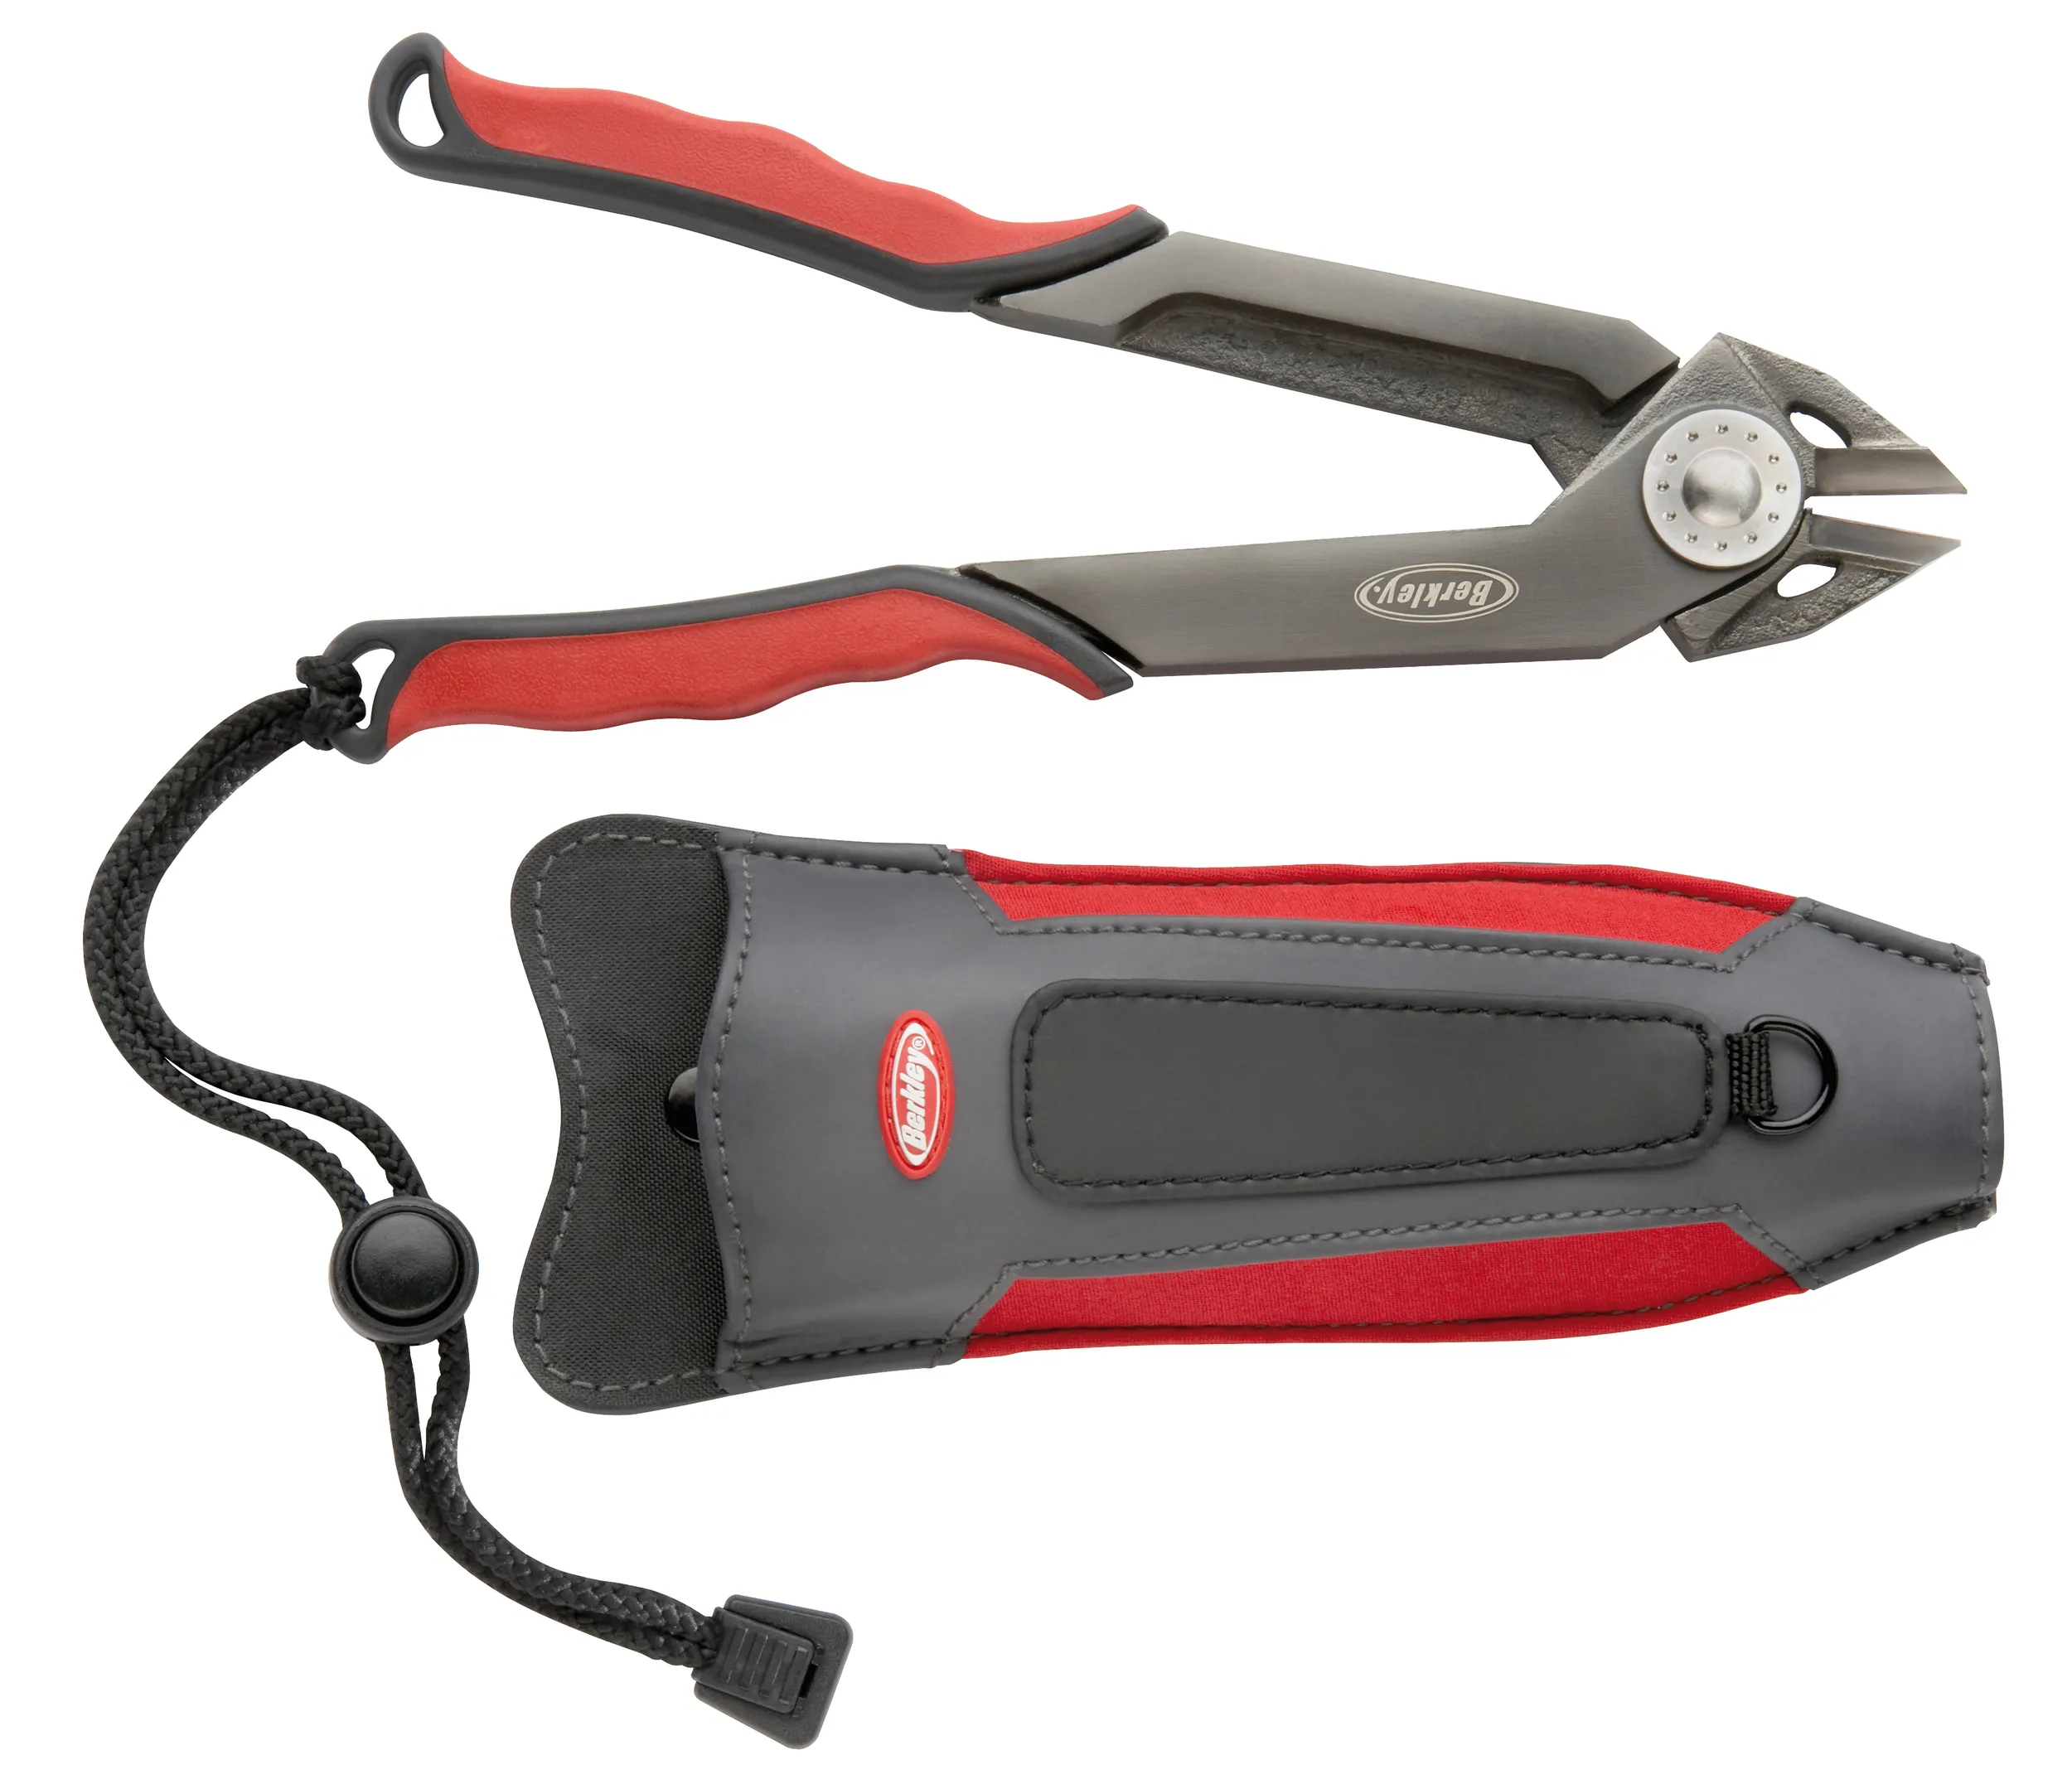 THWC HOOK AND WIRE CUTTER